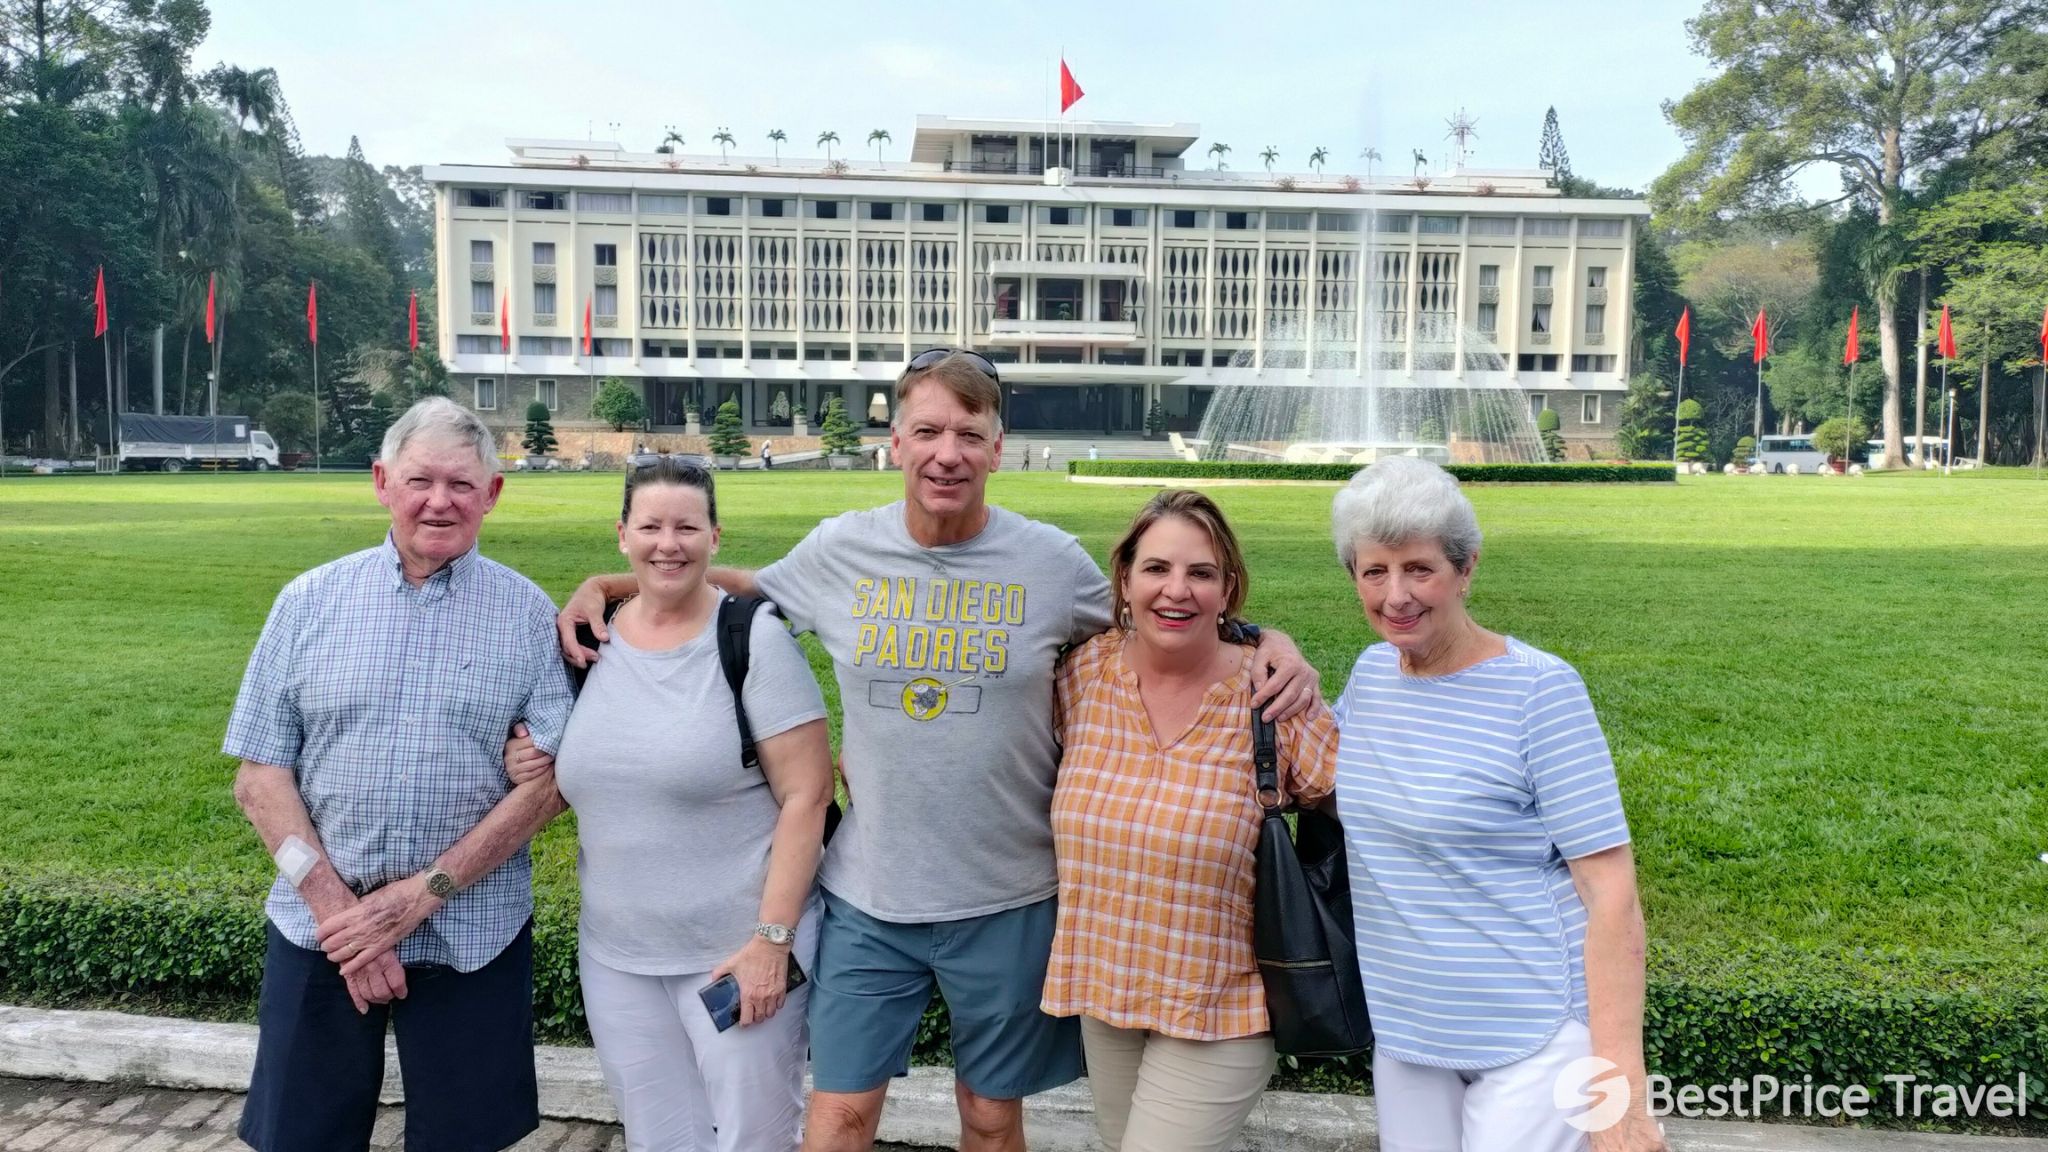 Day 12 Tourists Check In With The Independence Palace